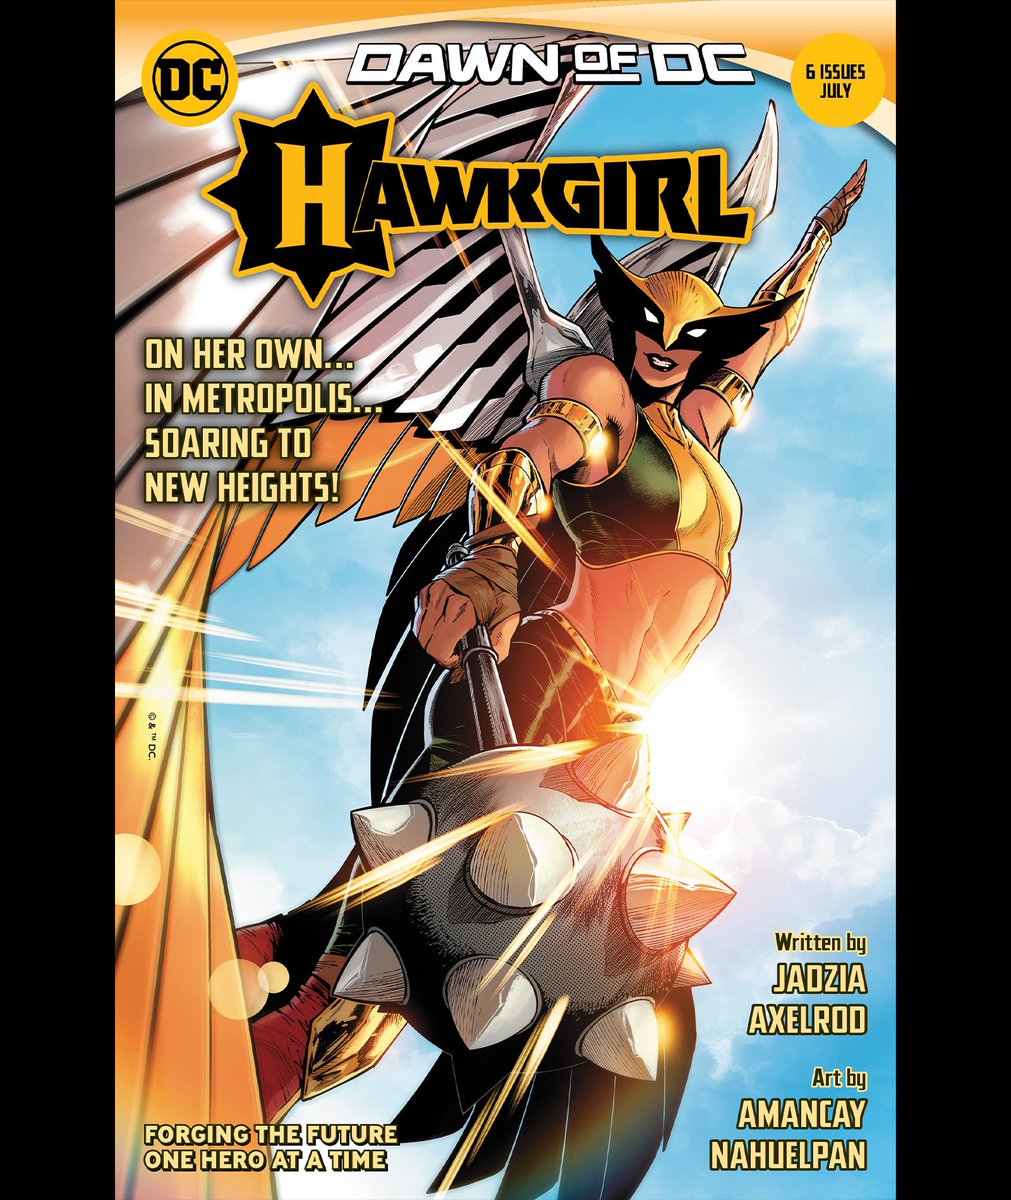 Hawkgirl FOC for issue #1 is Sunday, 6/25. Don’t miss the date! From @DCOfficial @planetx @fxstudiocolor_ @HassanOE and me! Out next July!